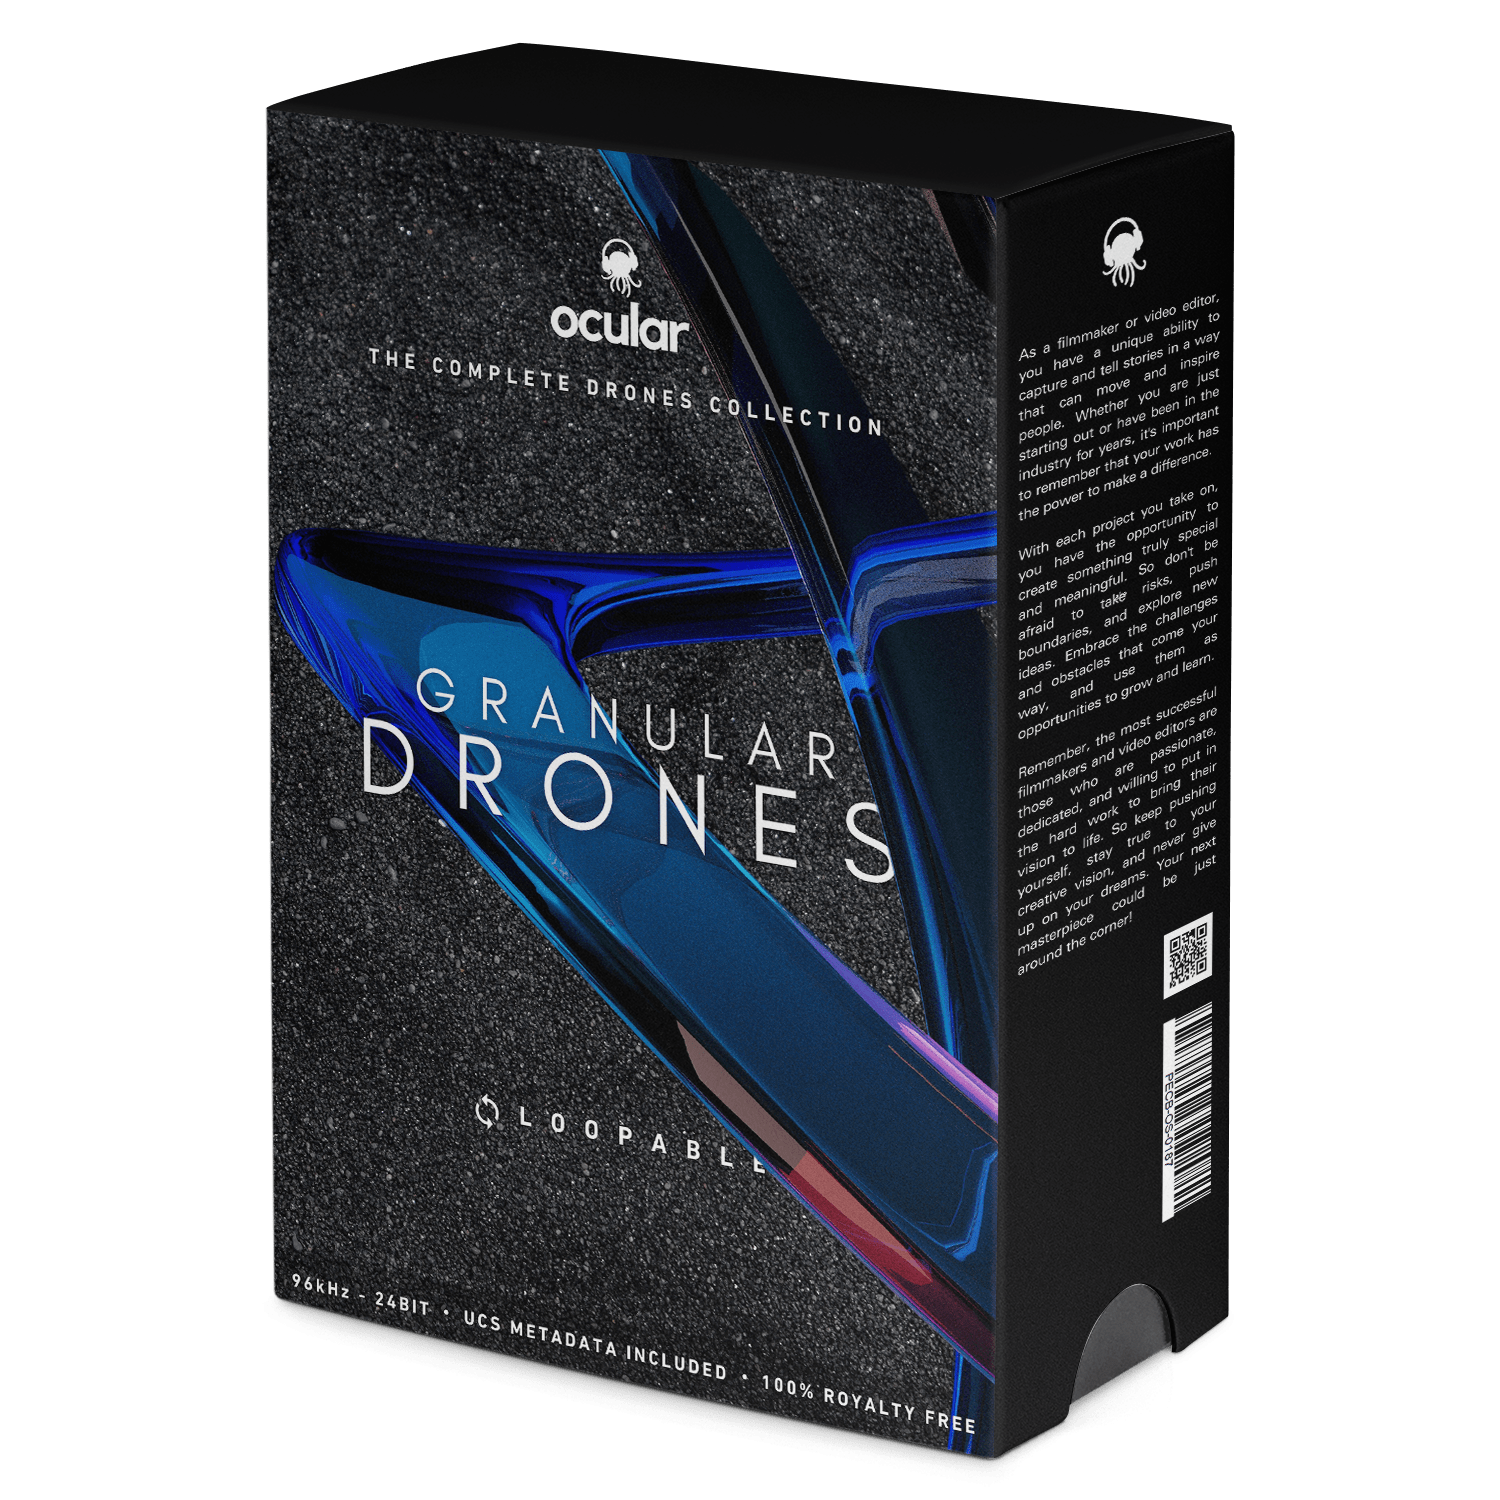 Granular Drones Sound Effects for Video Editing. Professional Sound FX Library.